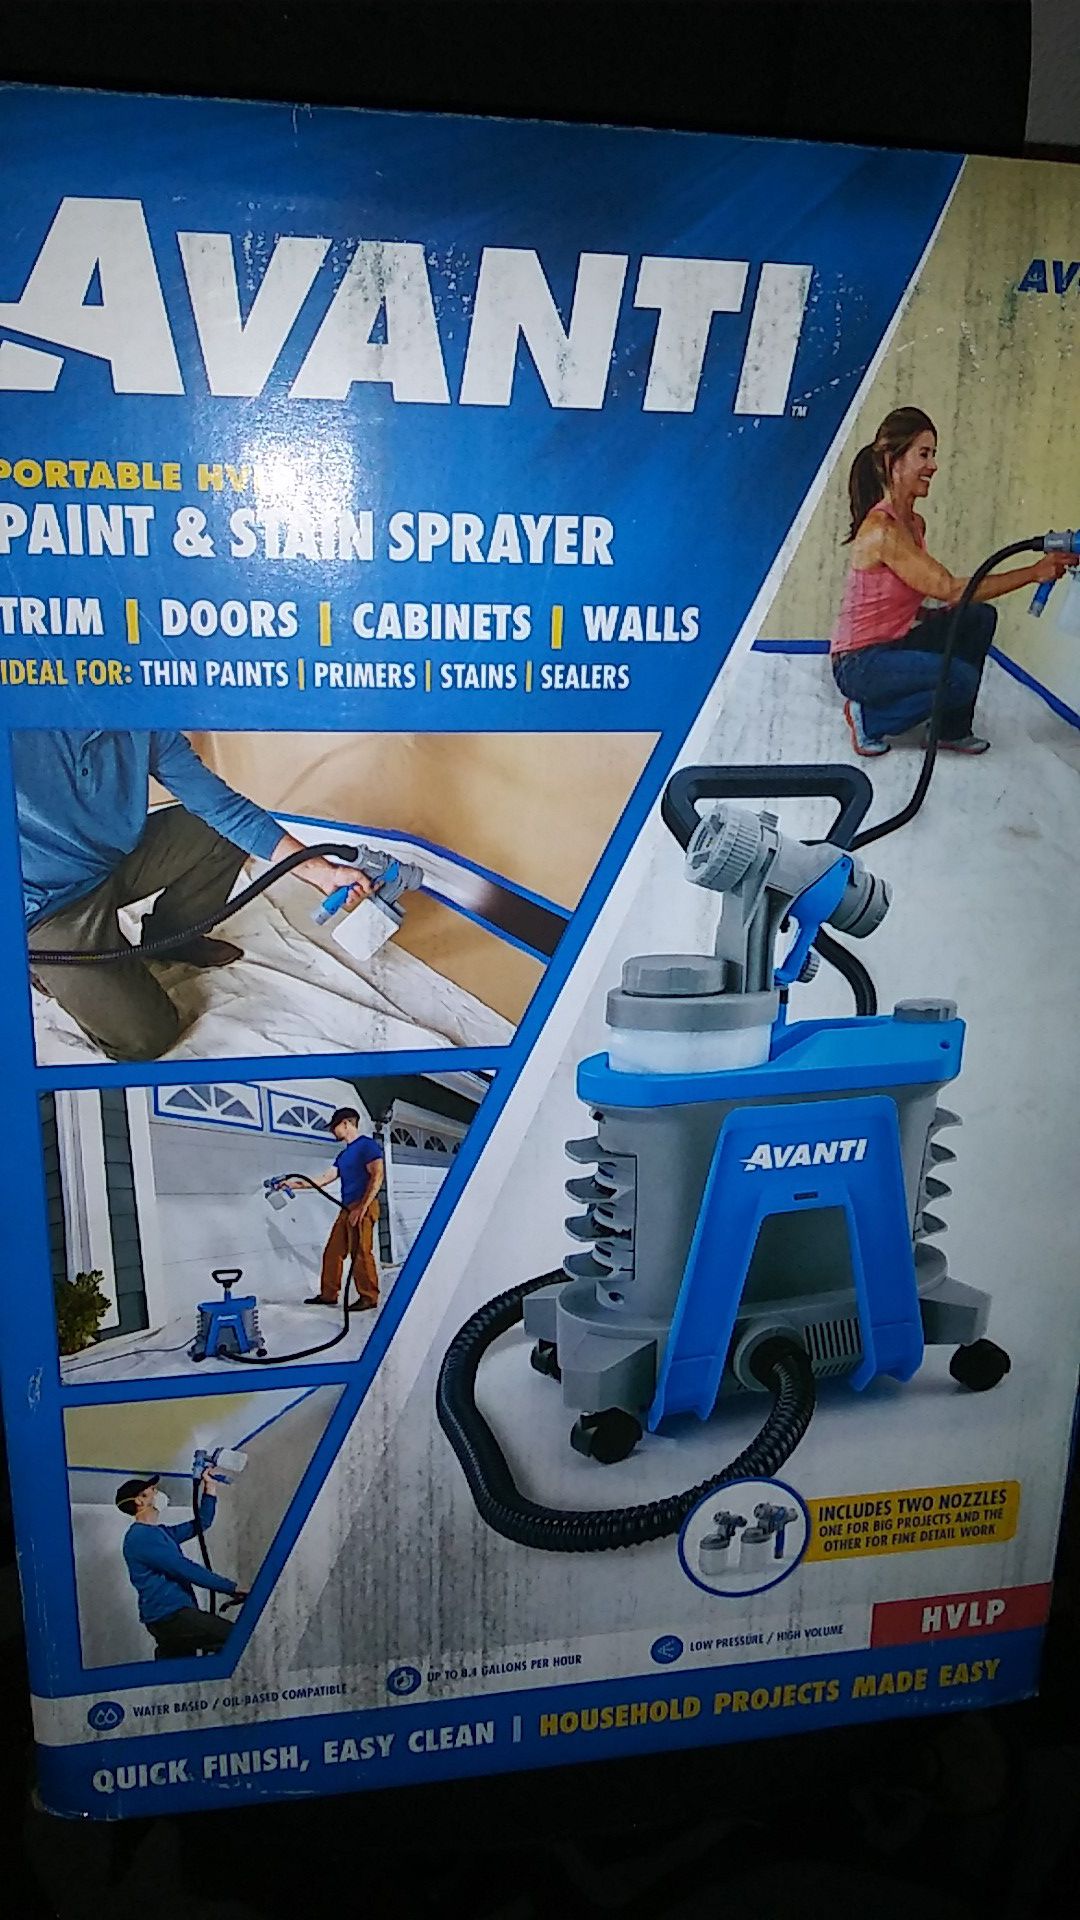 Paint and stain sprayer